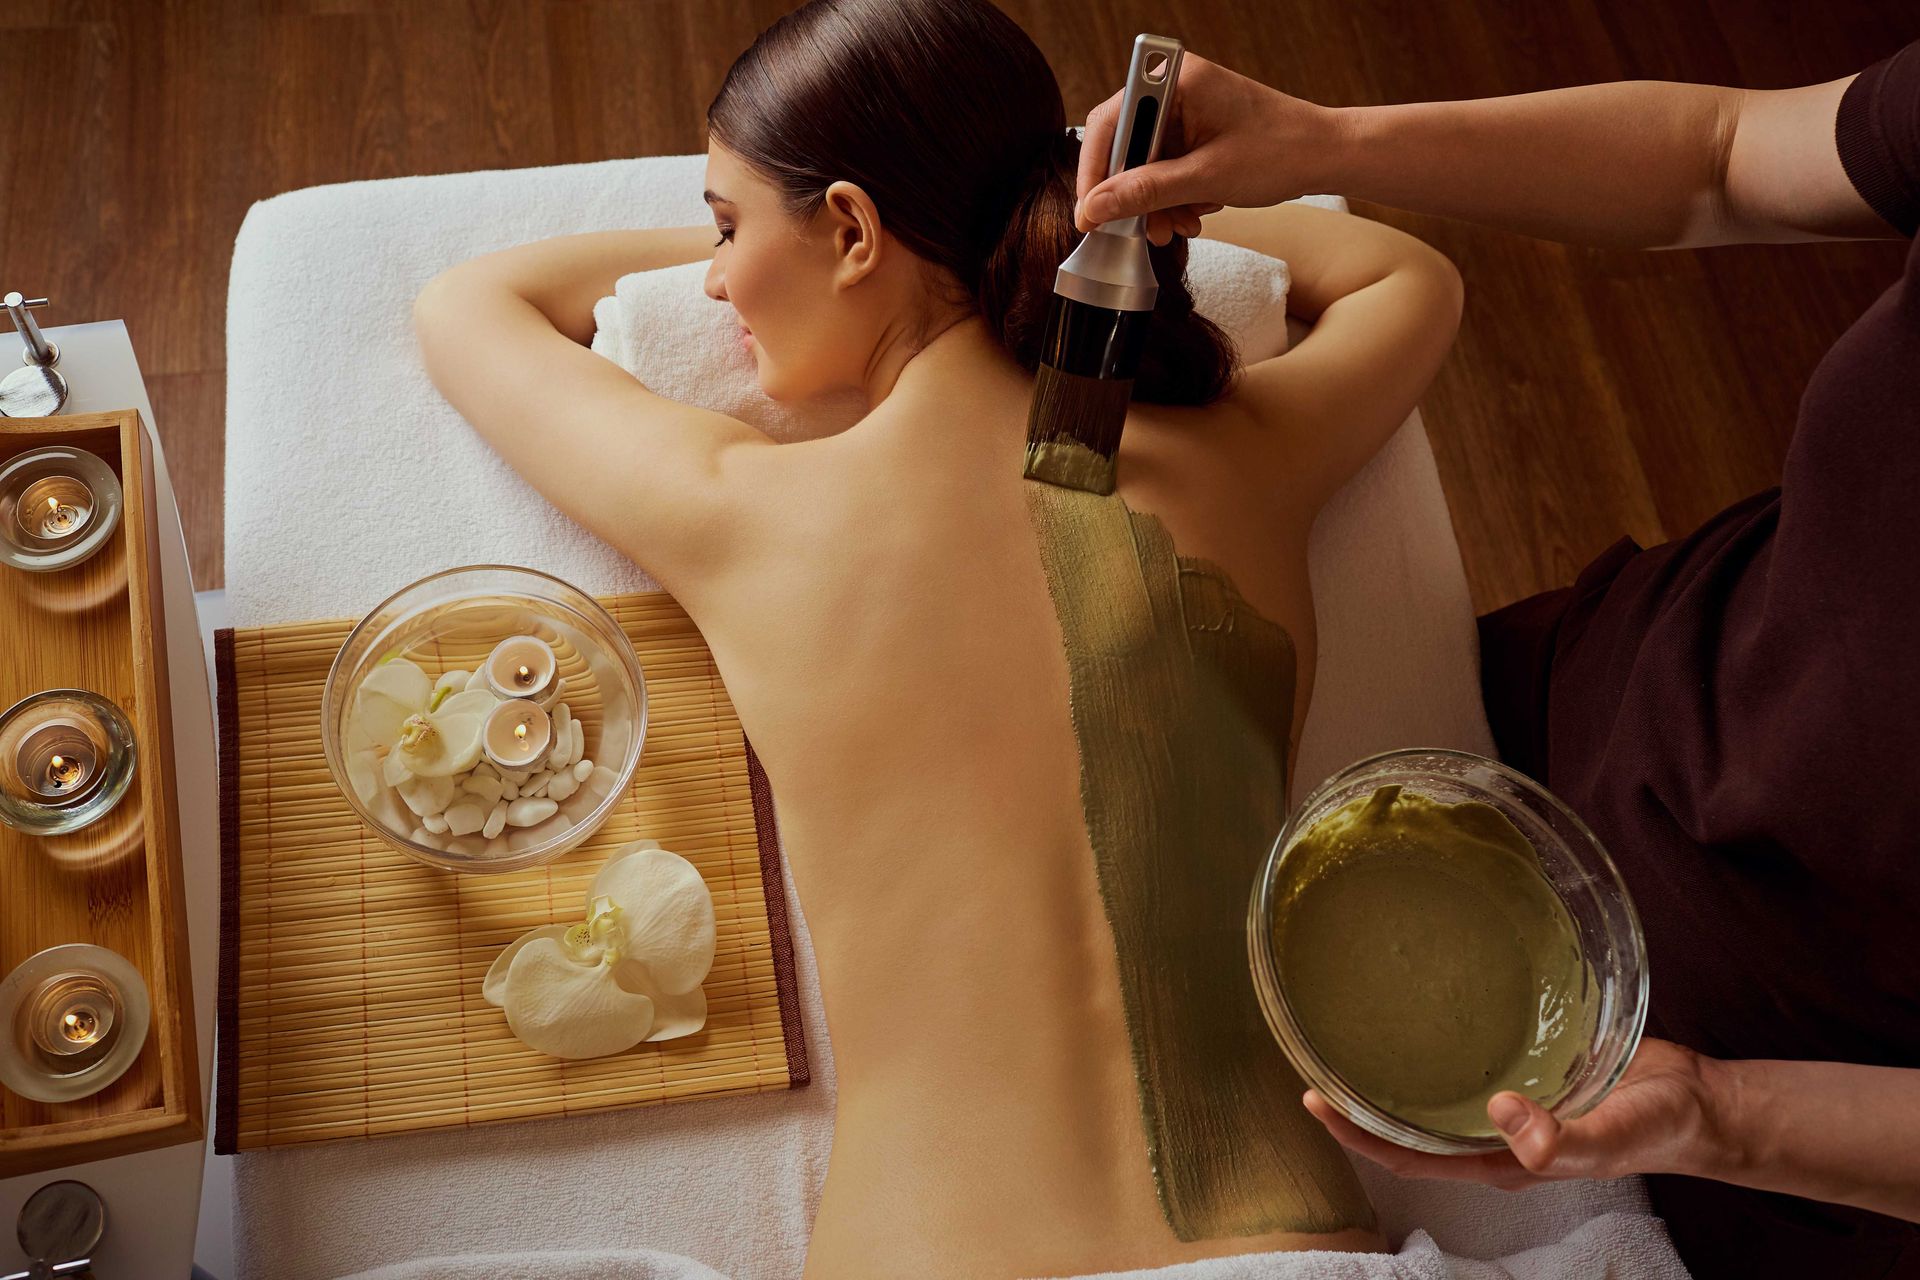 A woman is getting a body massage at a spa